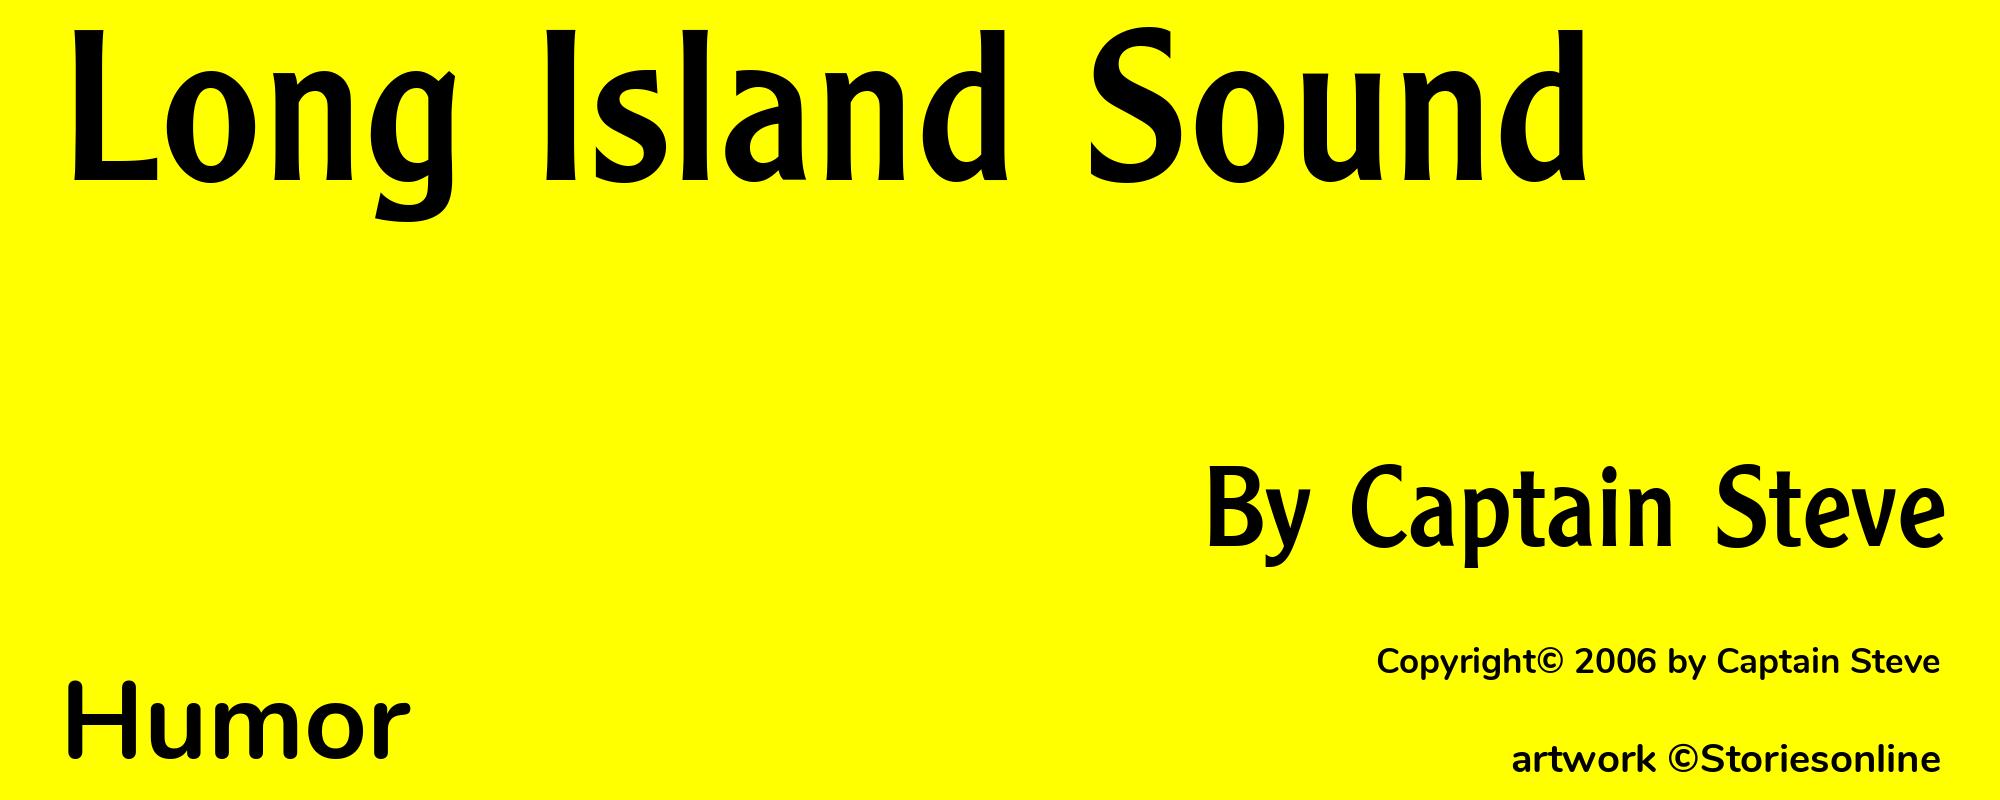 Long Island Sound - Cover